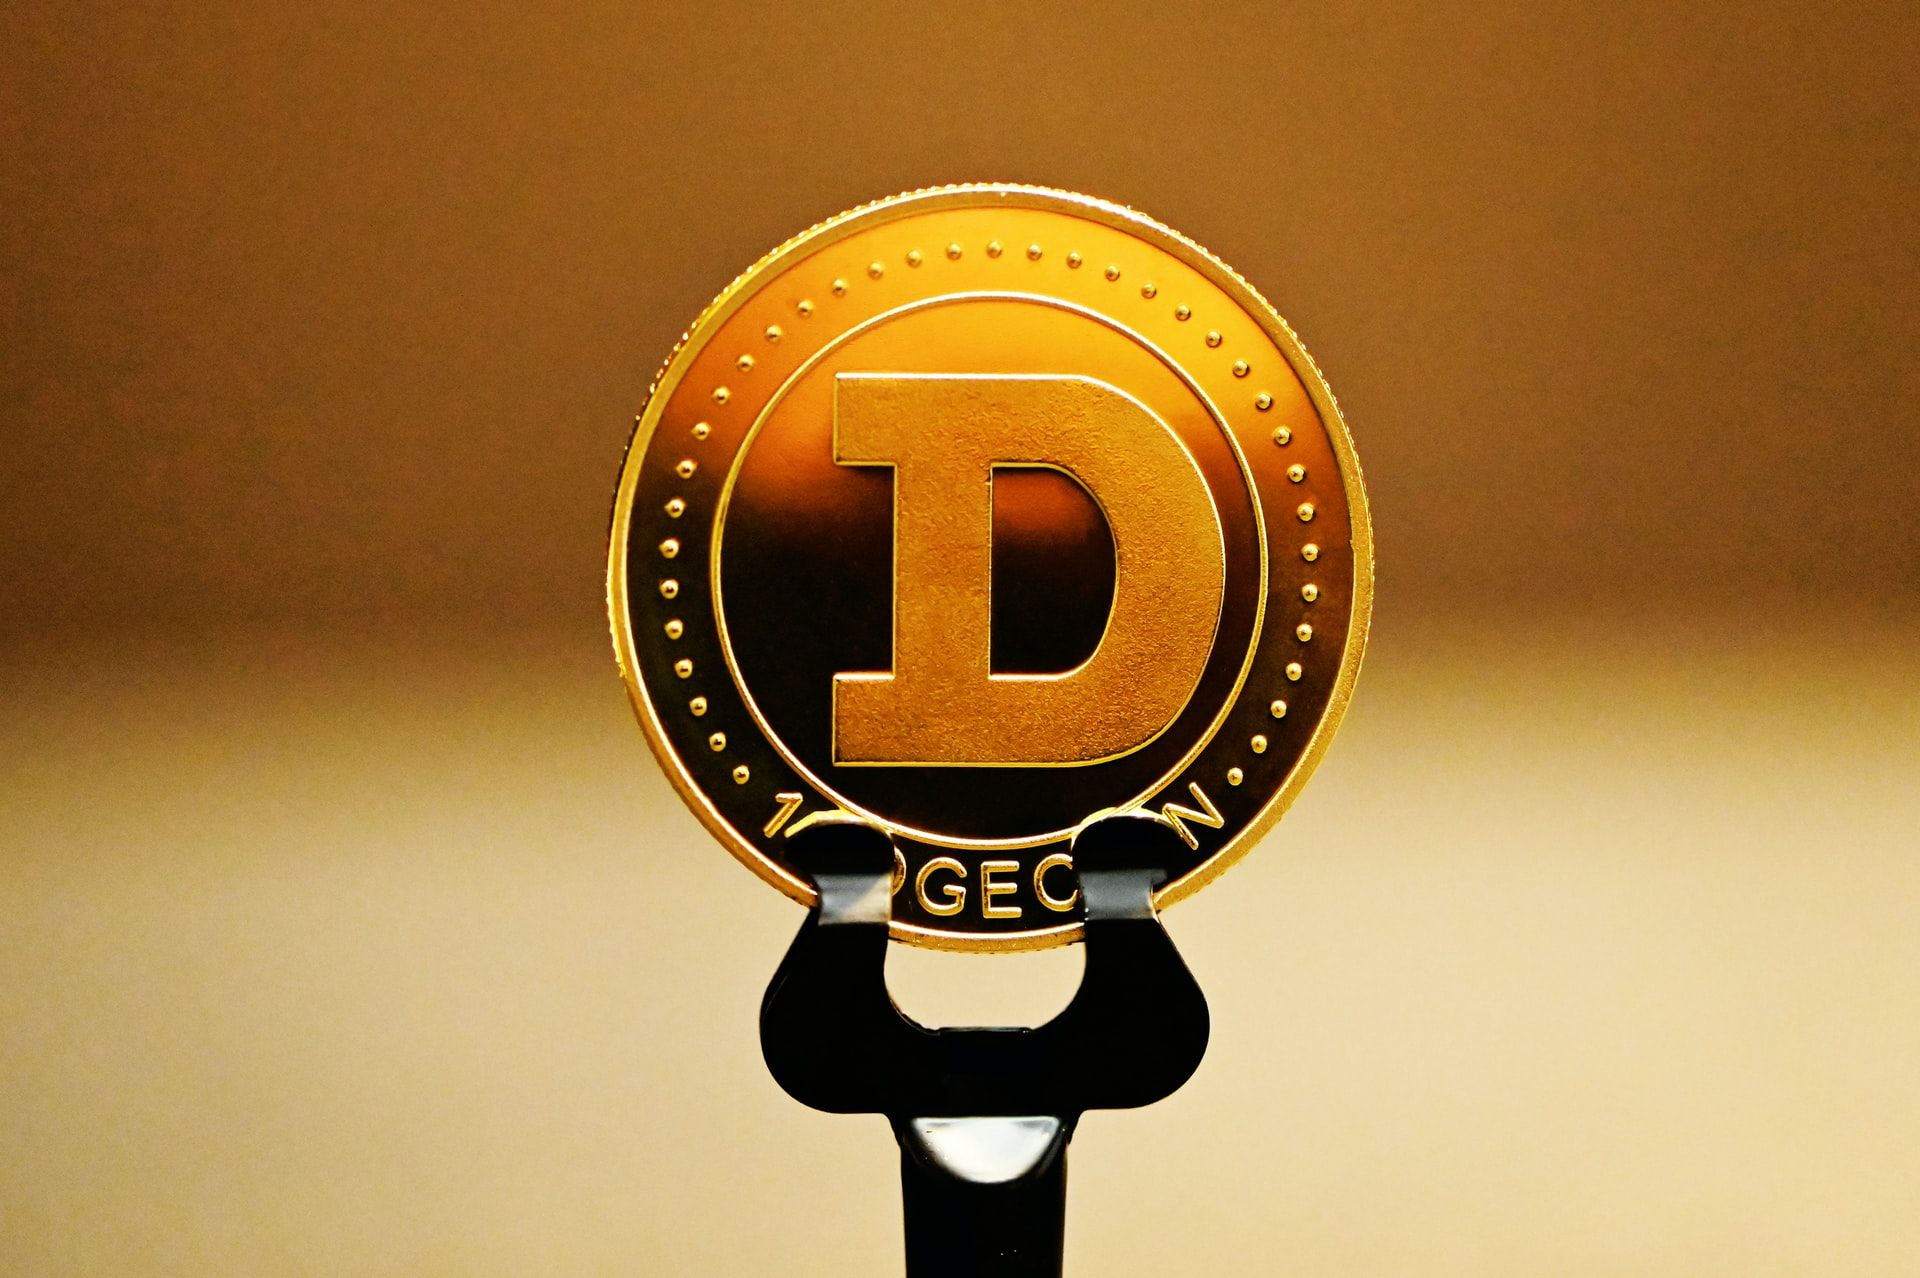 Image of a physical Dogecoin 